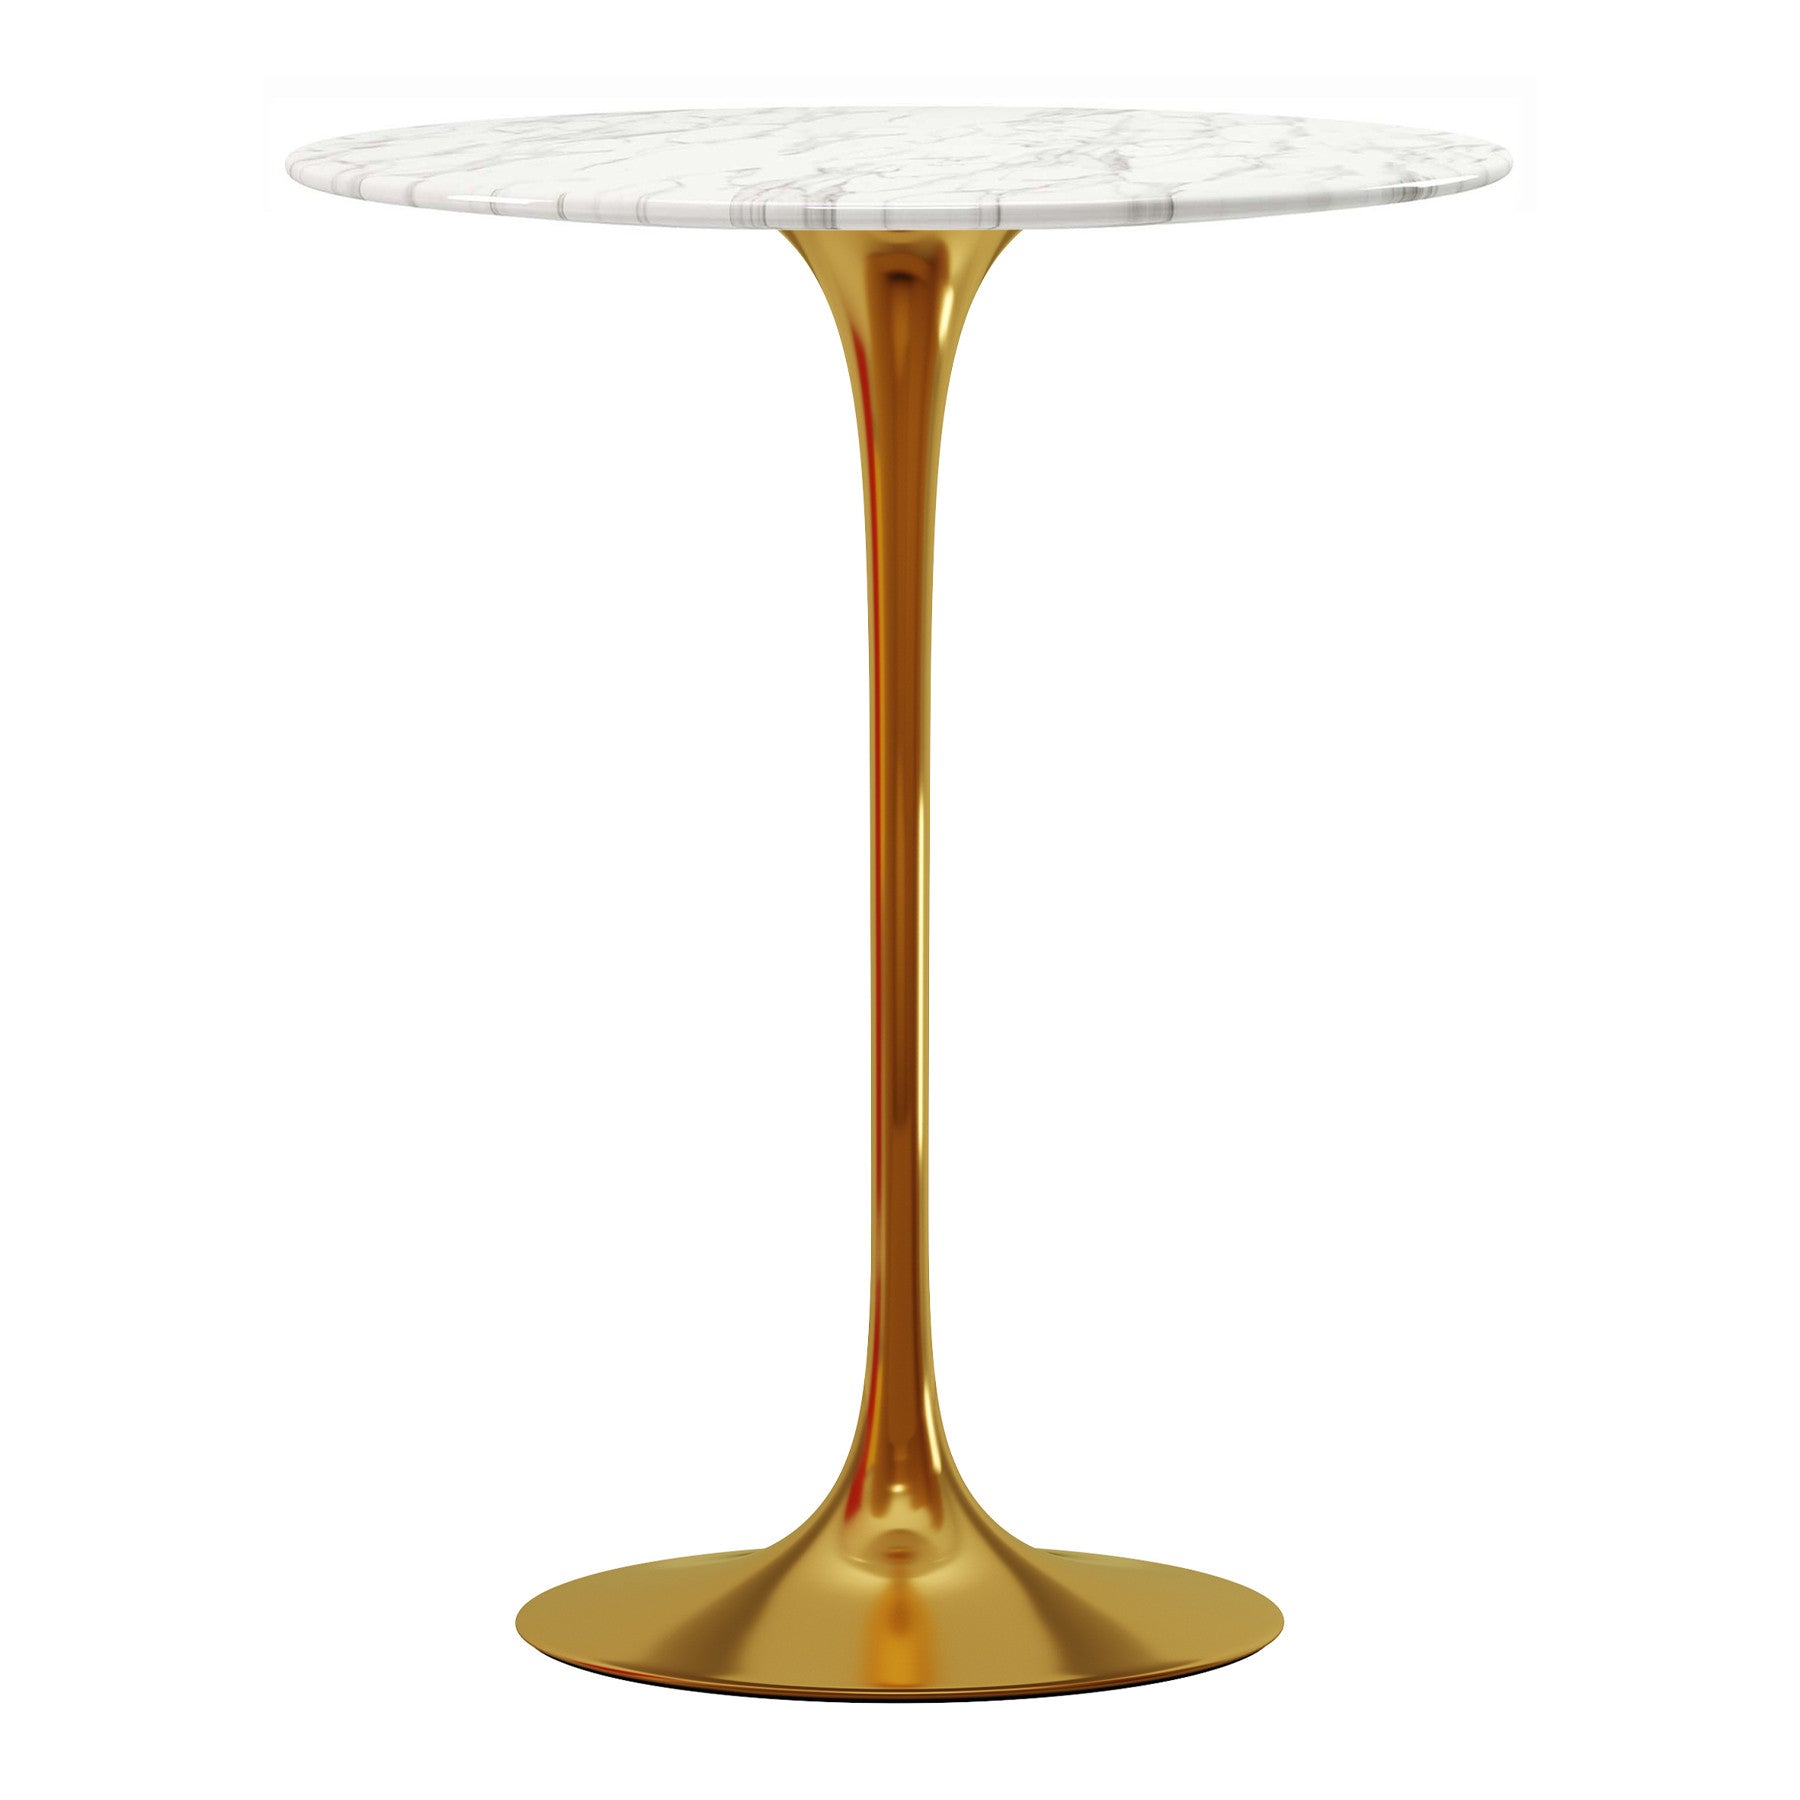 32" White and Gold Rounded Marble and Metal Bar Table